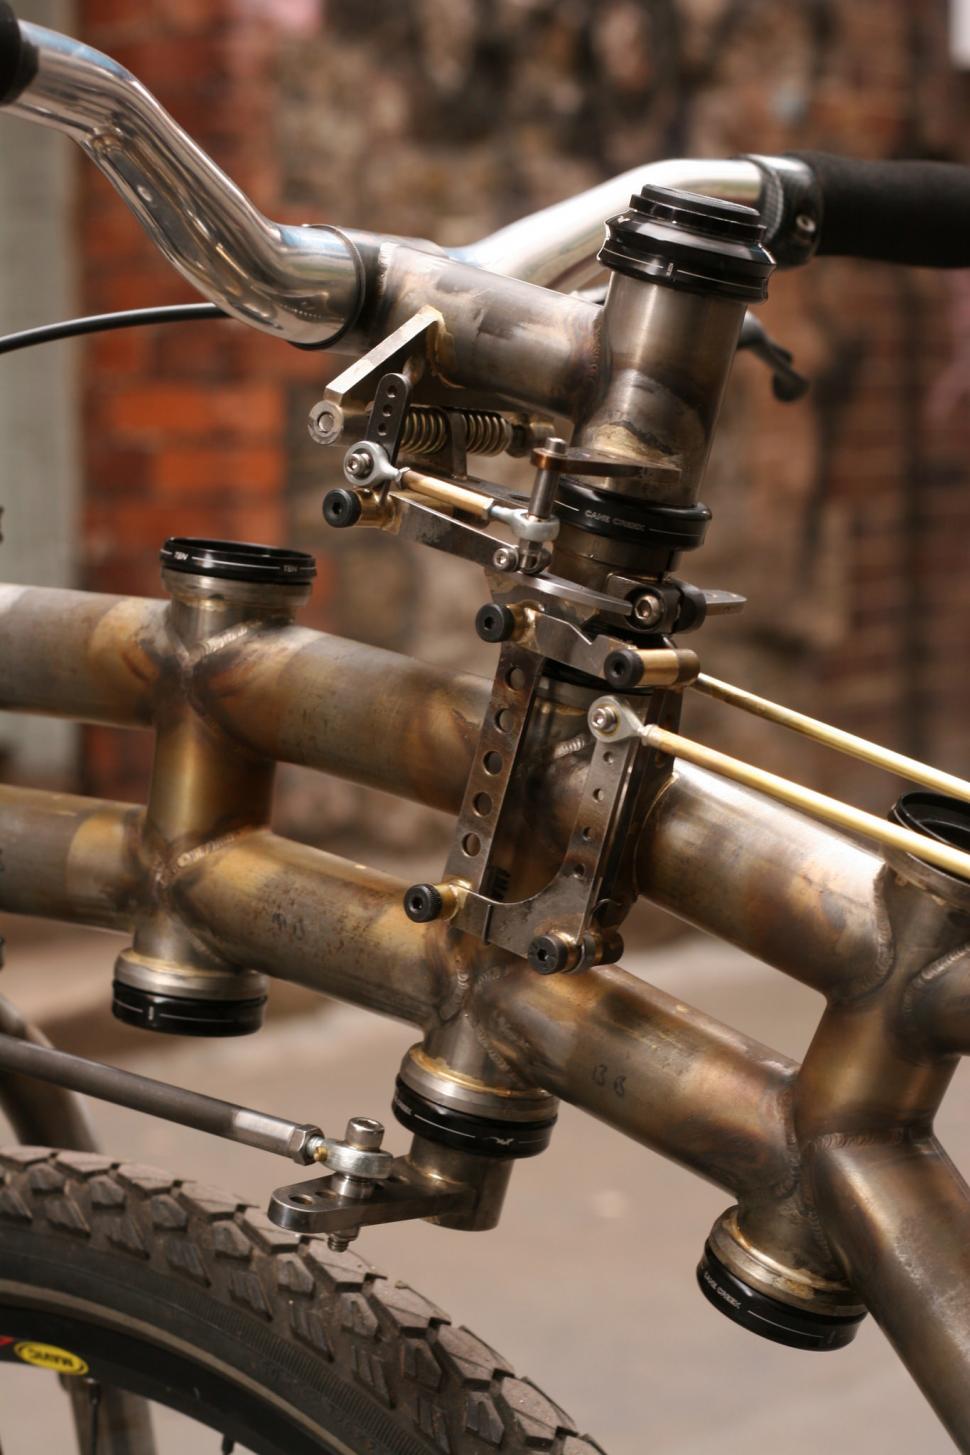 coventry bespoke cycles